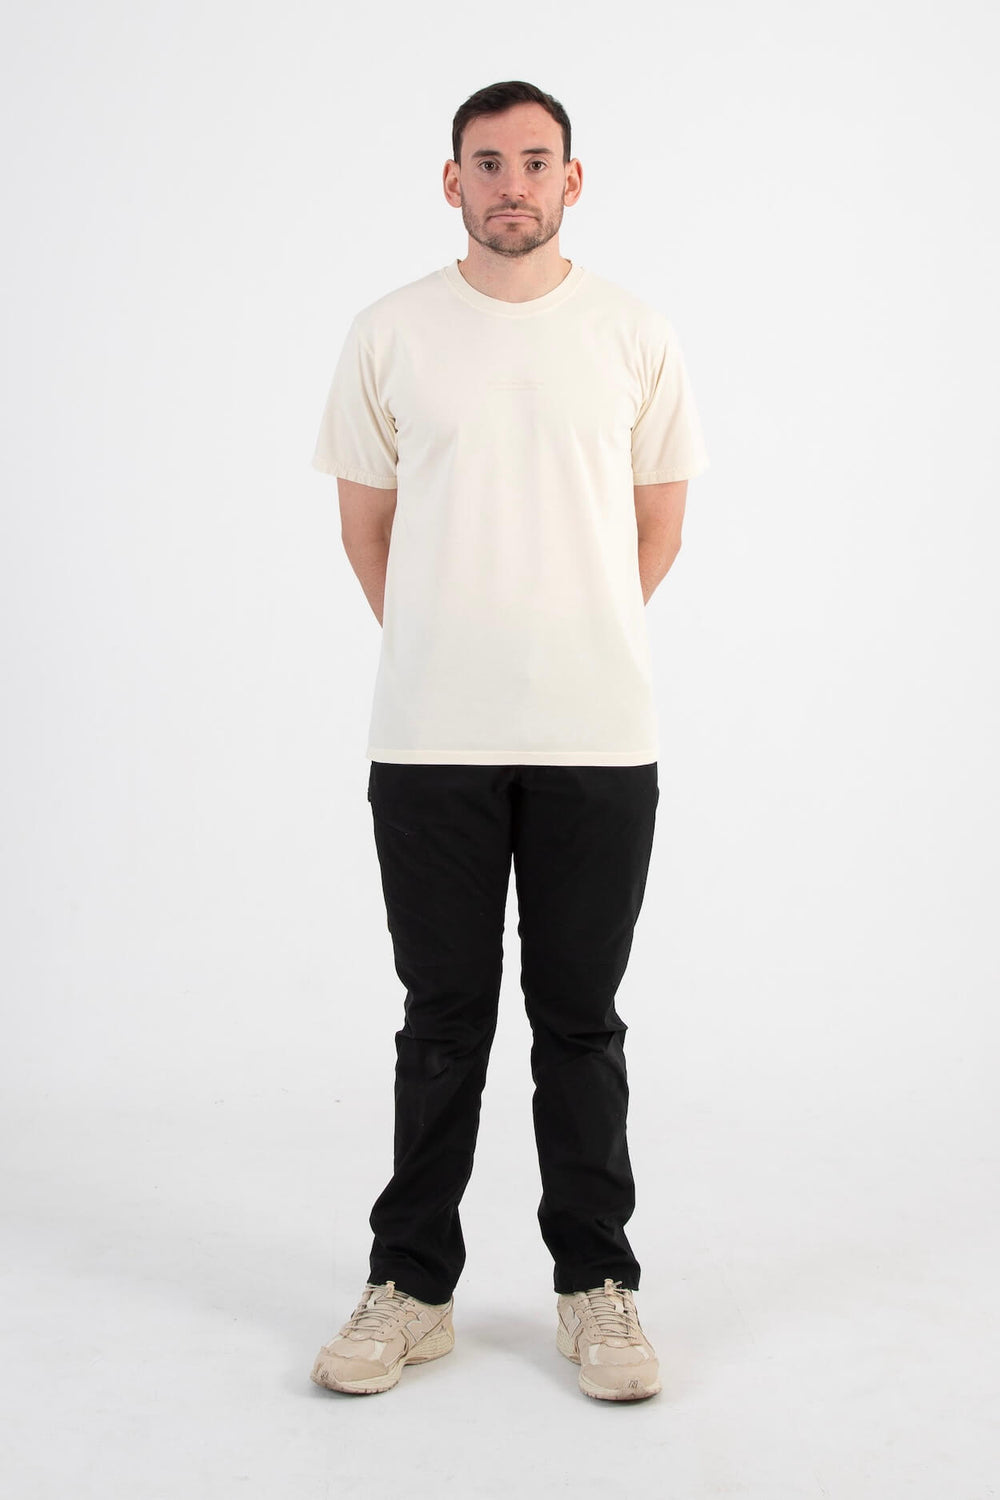 Model standing in a studio wearing an Angry Pablo t-shirt